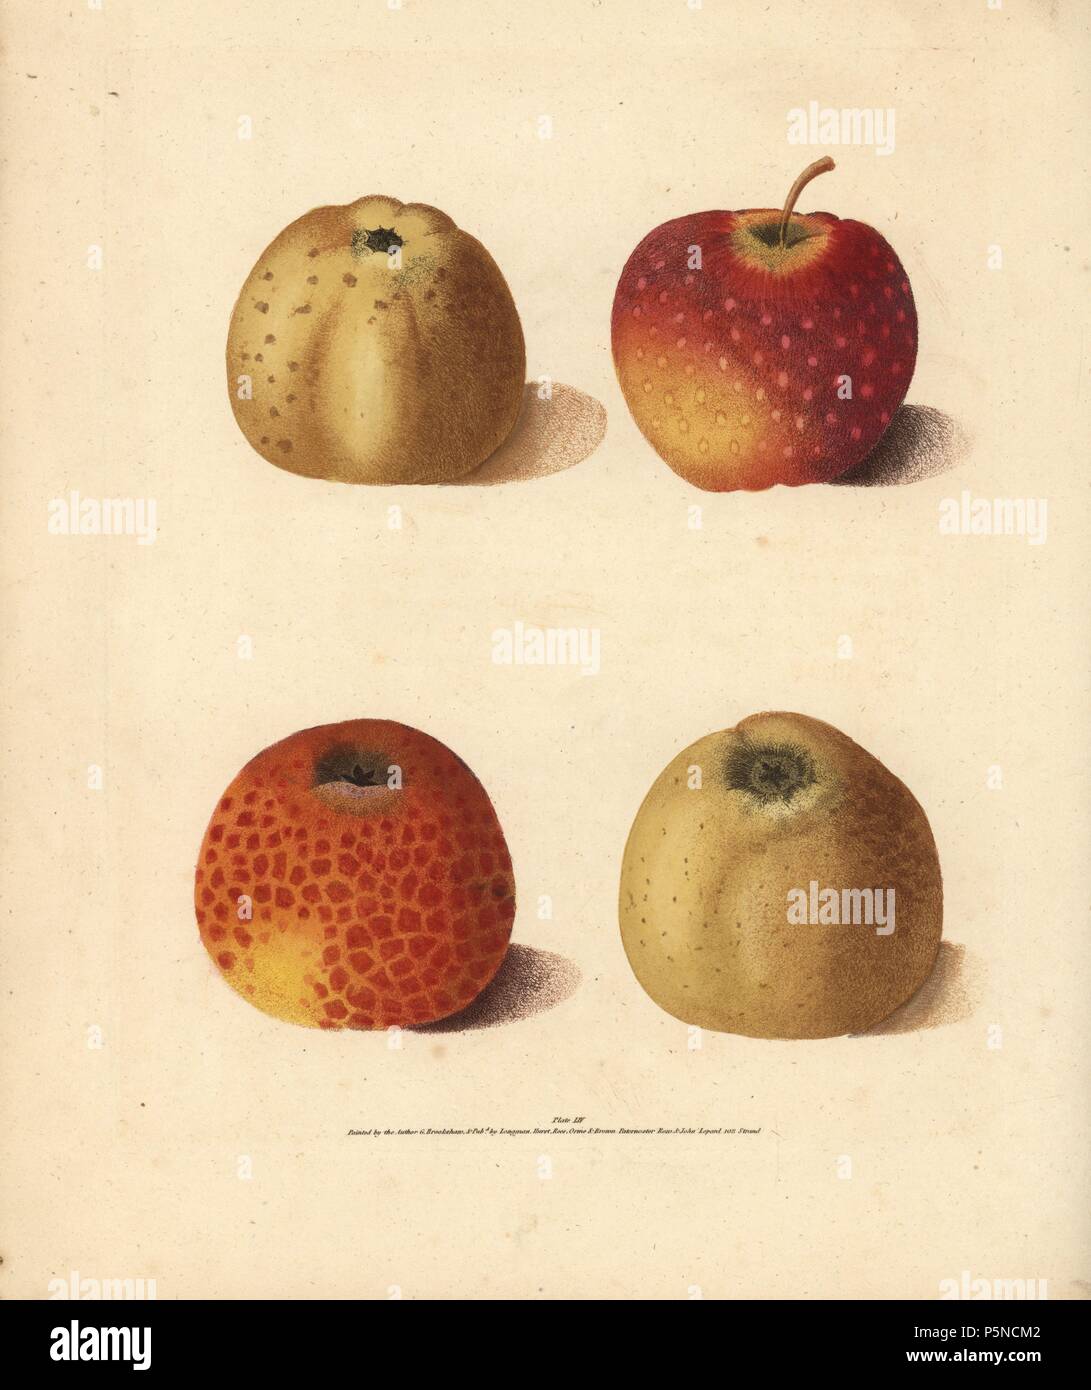 Apple varieties, Malus domestica: Courpendu Rouge, Courpendu Blanche, Embroidered Pippin and Lemon Pippin. Handcoloured stipple engraving of an illustration by George Brookshaw from his own 'Pomona Britannica,' London, Longman, Hurst, etc., 1817. The quarto edition of the original folio edition published from 1804-1812. Brookshaw (1751-1823) was a successful cabinet maker who disappeared in the 1790s before returning as a flower painter with the anonymous 'New Treatise on Flower Painting,' 1797. Stock Photo